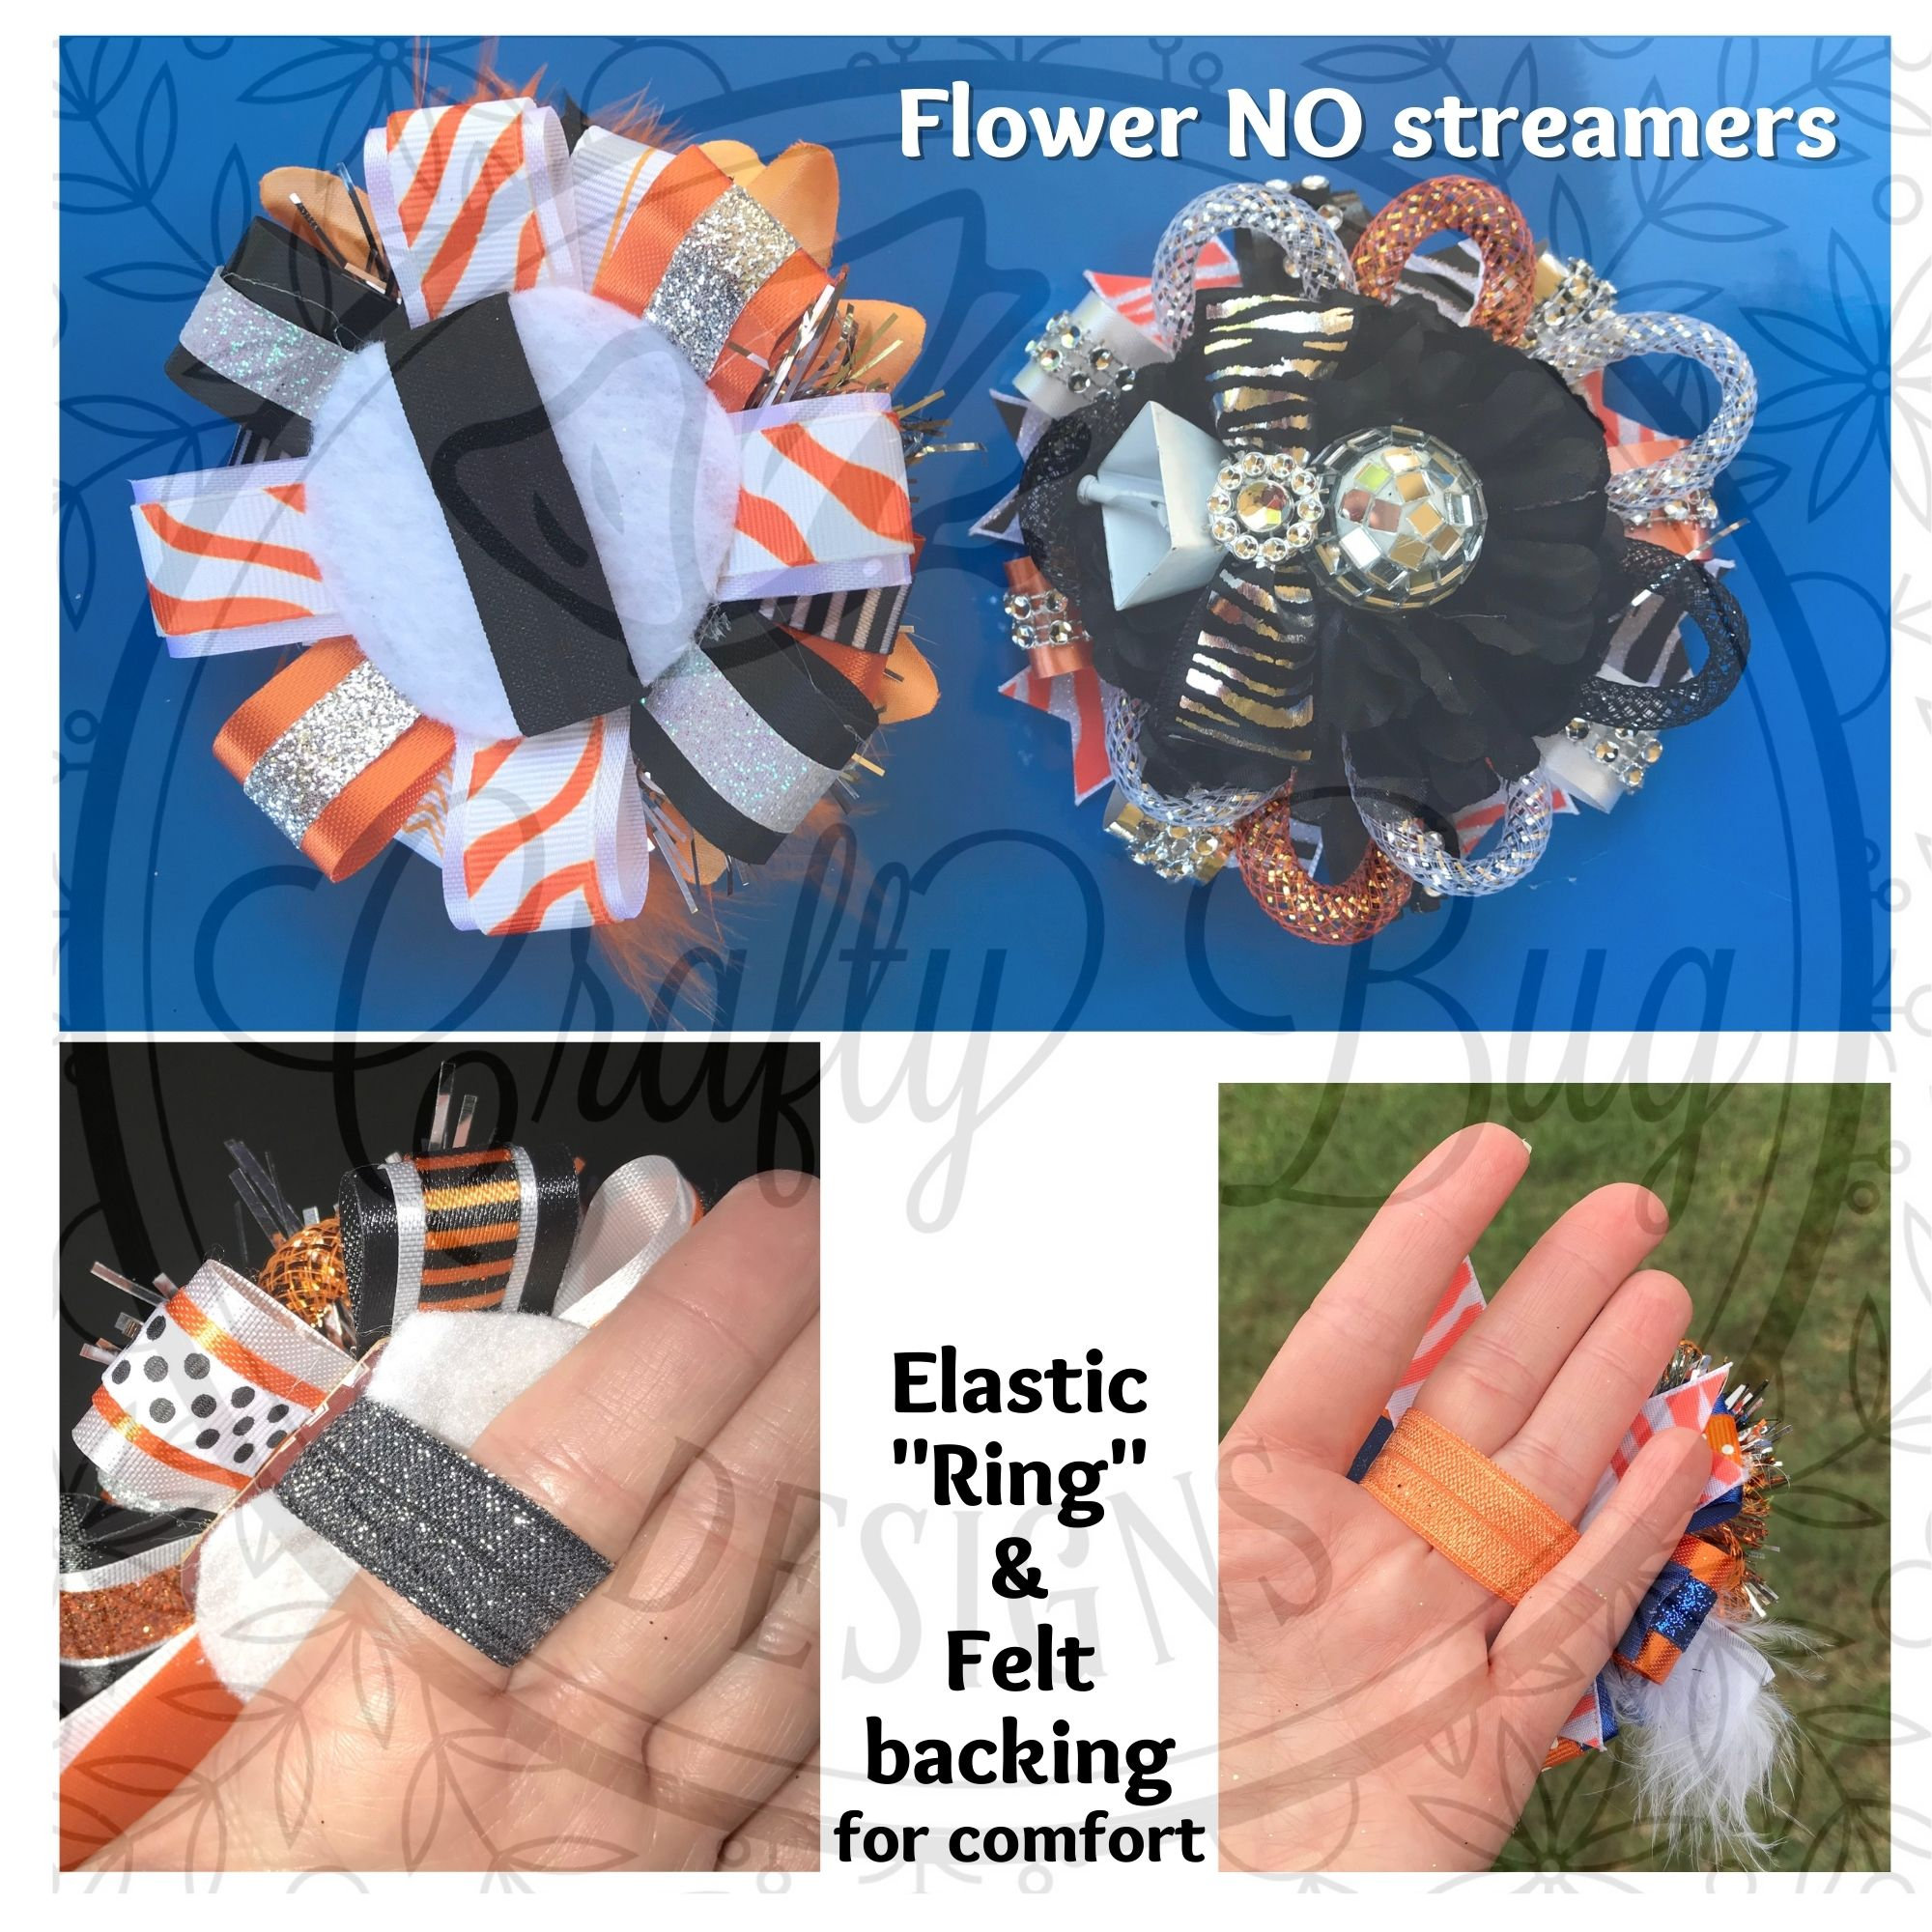 If your a homecoming mum maker like we are. This automatic tape